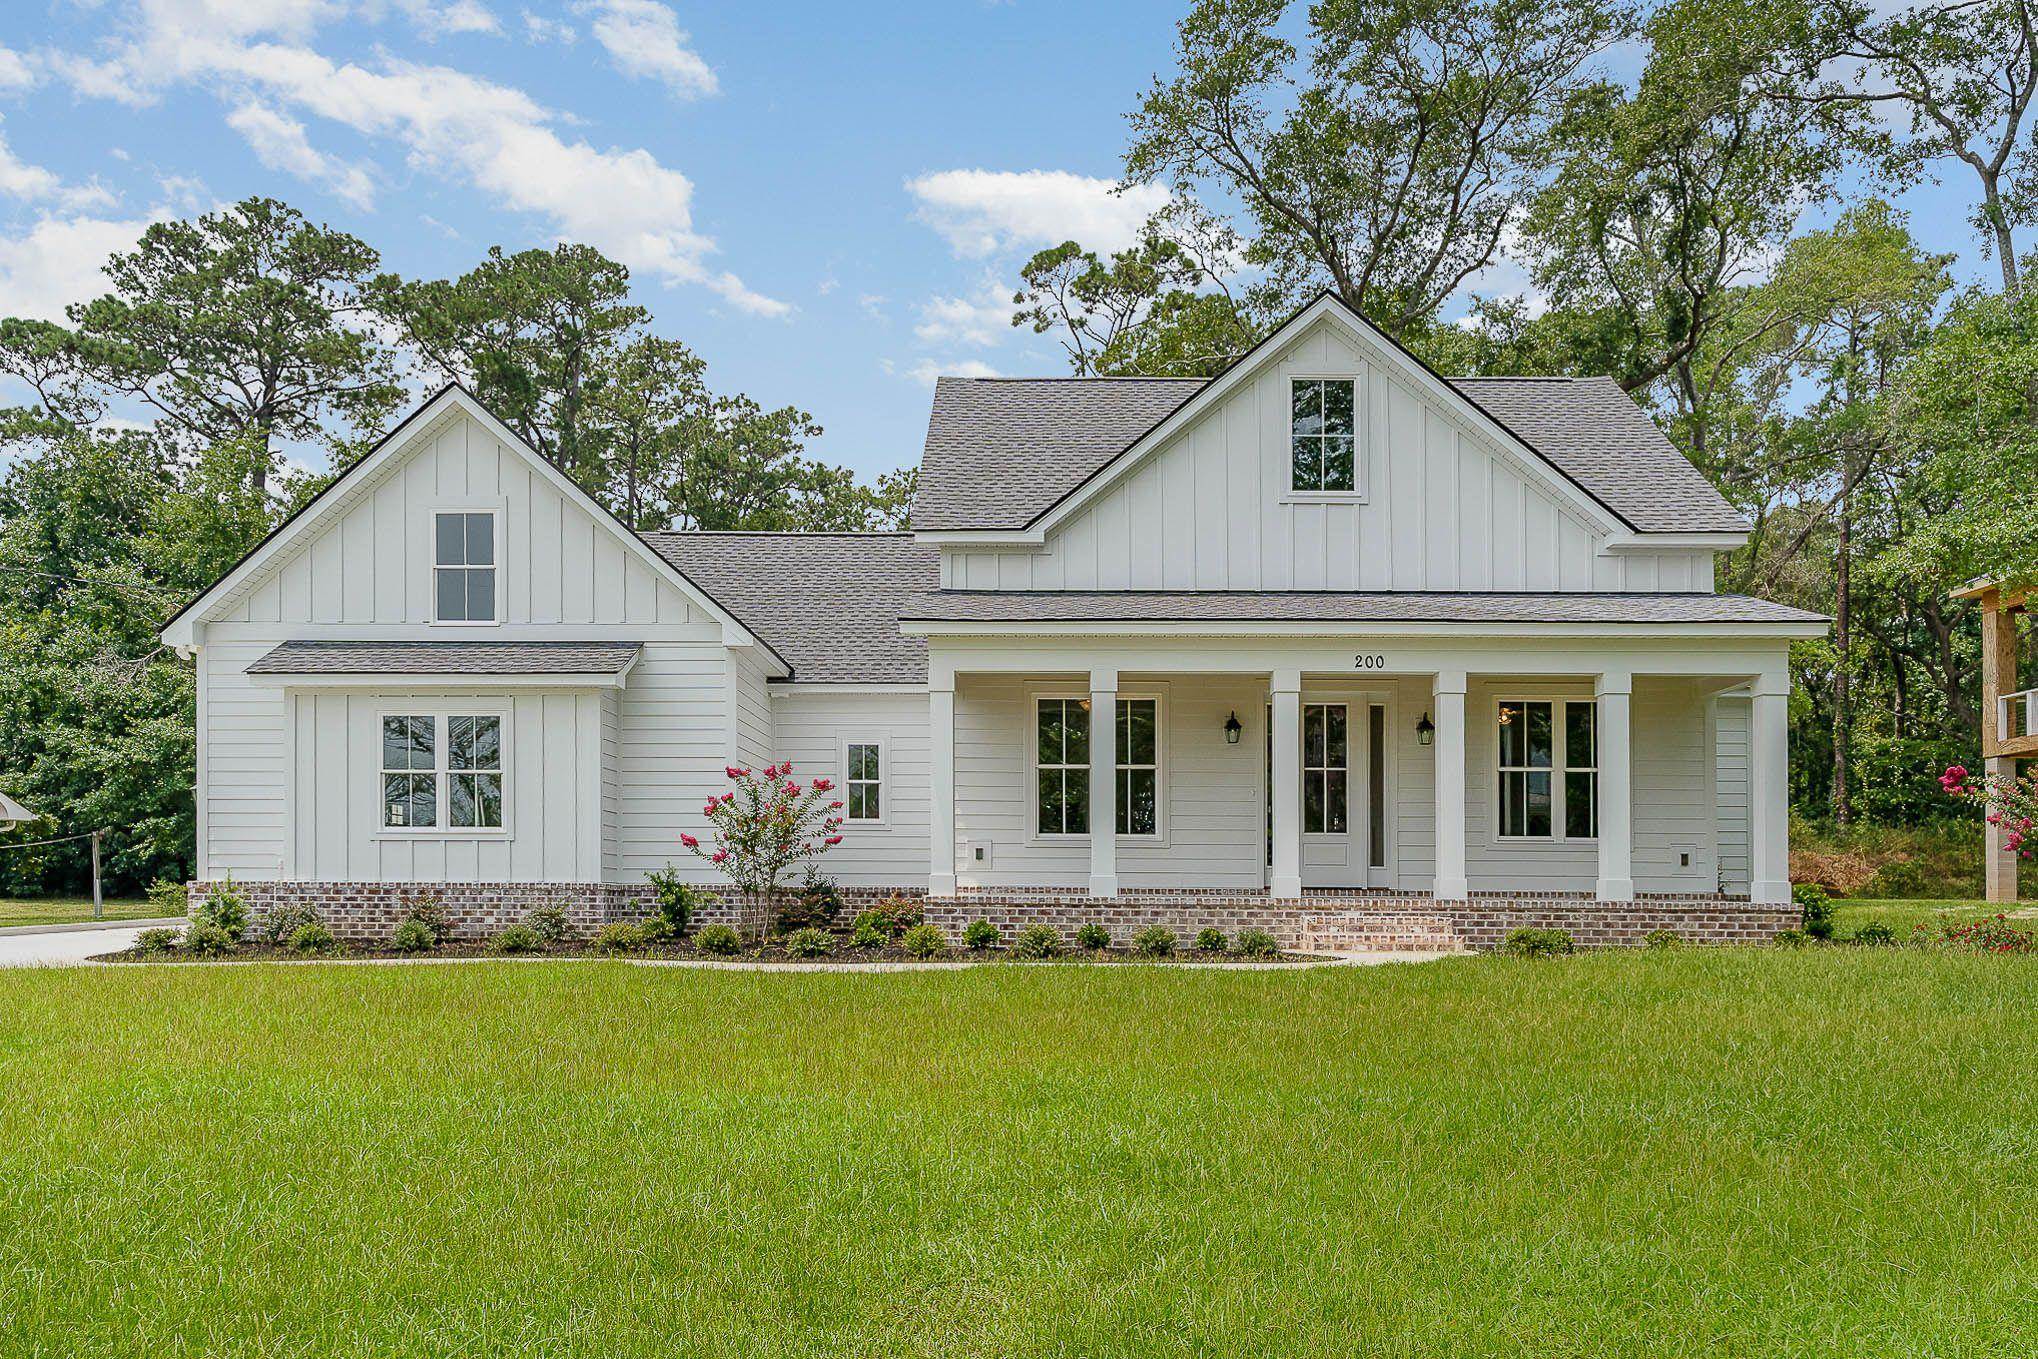 200 Midway Dr. Pawleys Island, SC 29585